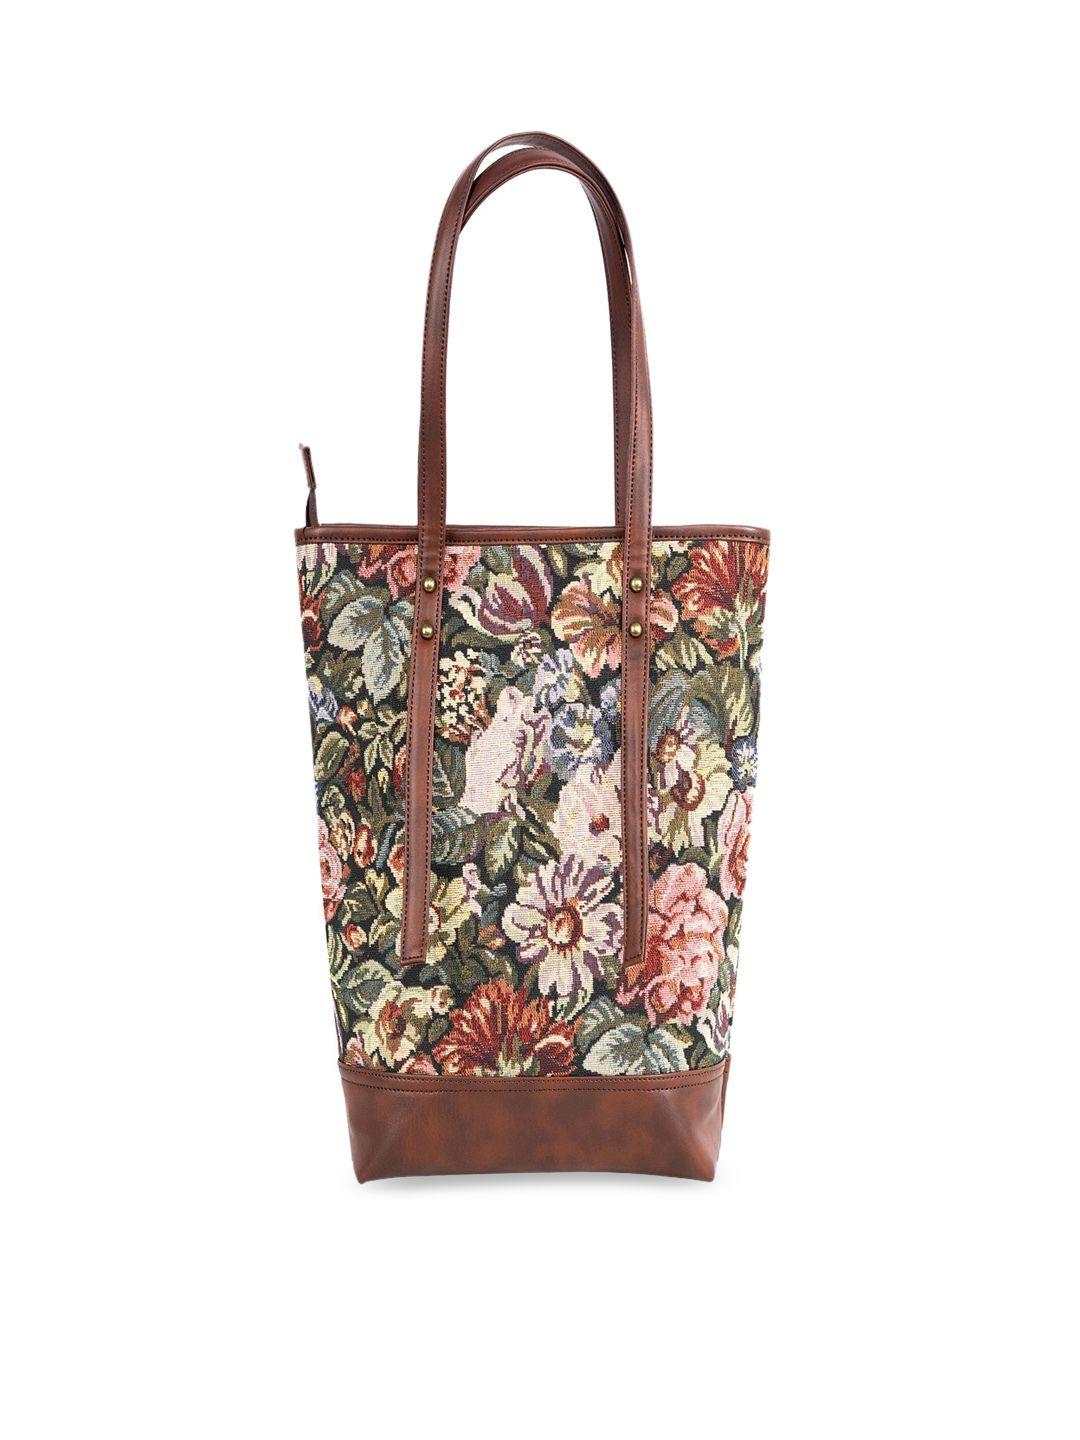 rudhira floral printed leather structured tote bag